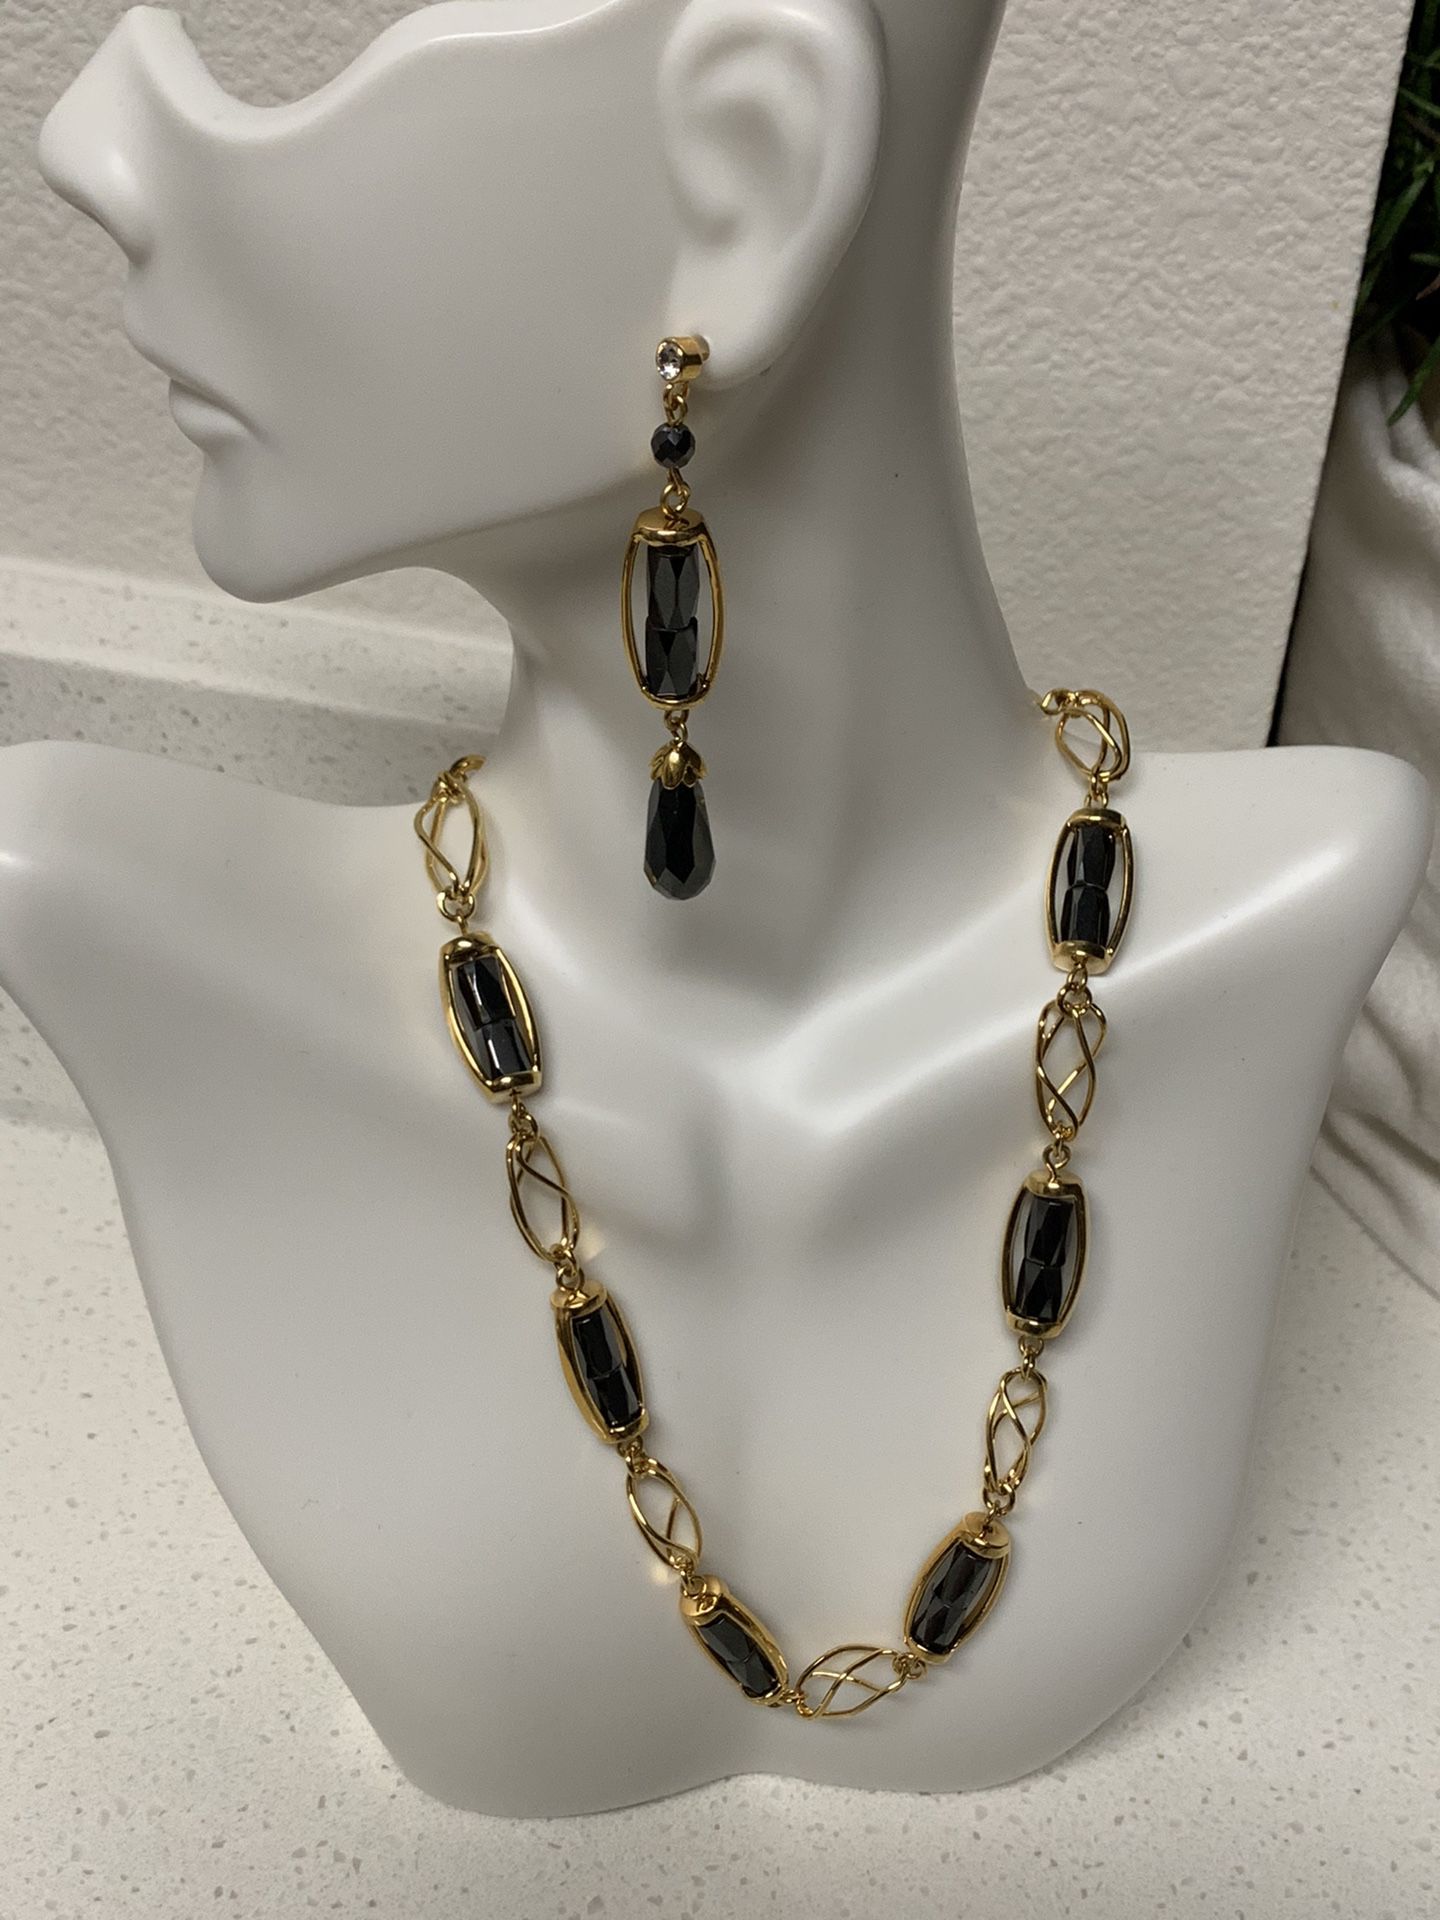 Fifth Avenue Collection Jewelry - NEW 30% off Hematite necklace and earrings set